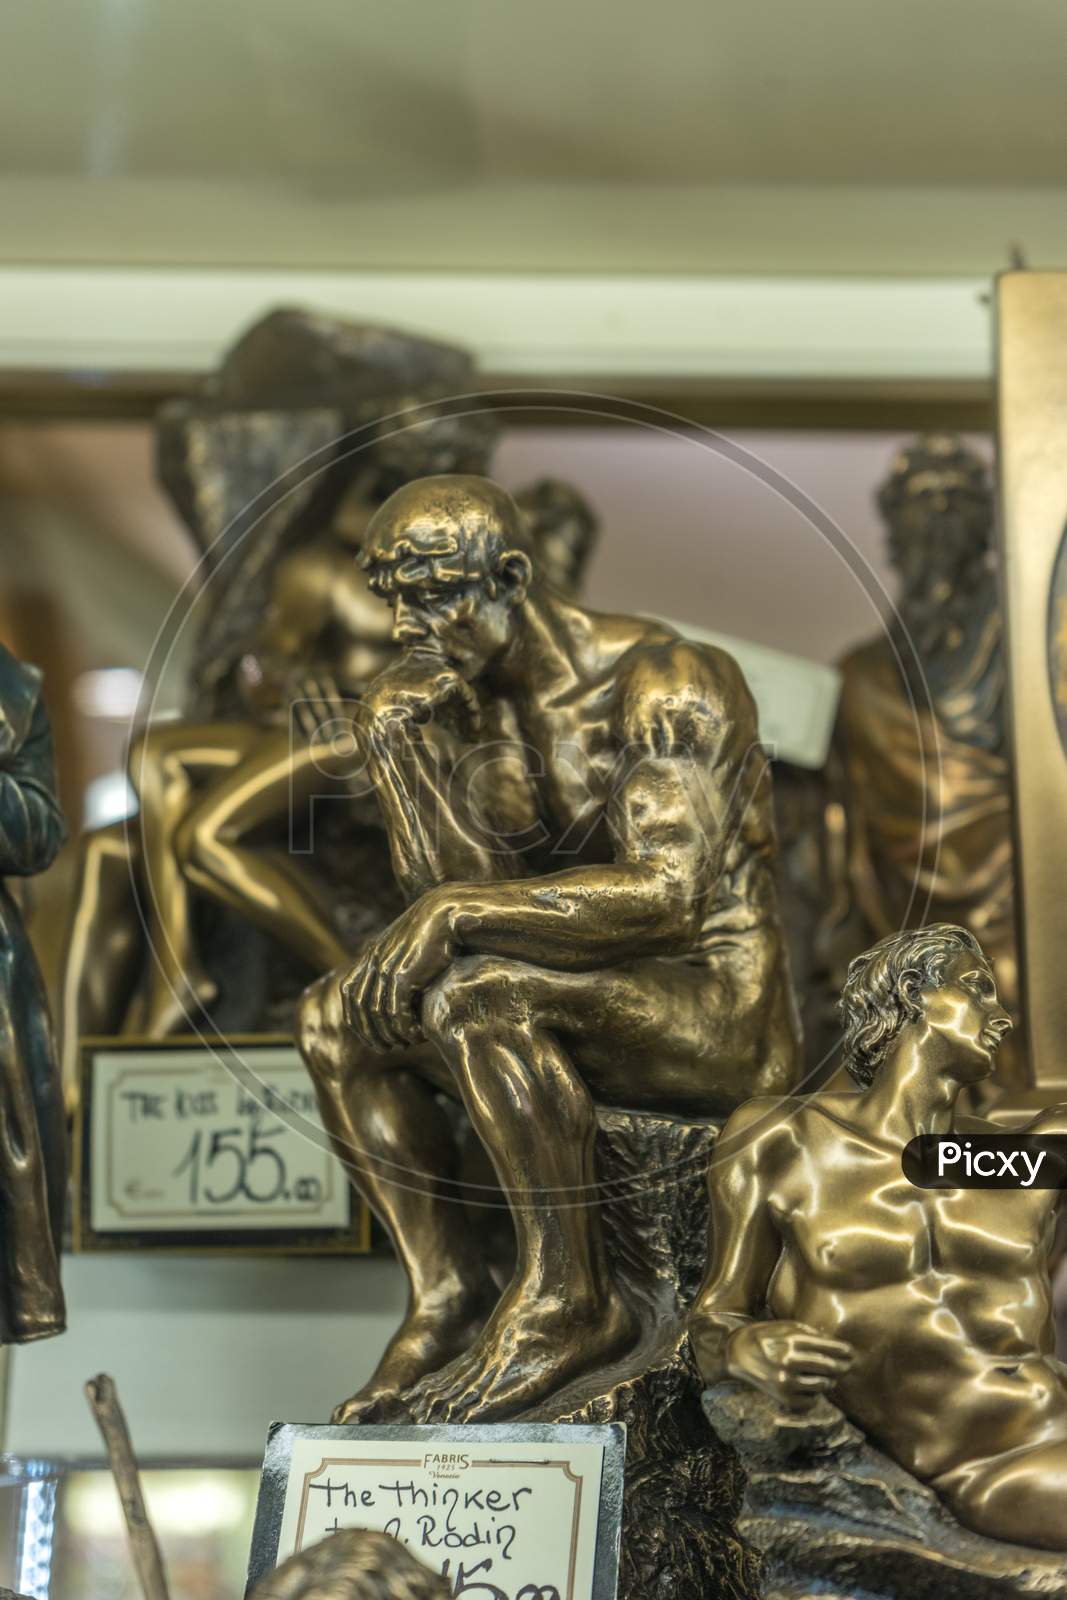 Venice, Italy - 30 June 2018: Thinker Artifacts On Display In A Shop In Venice, Italy